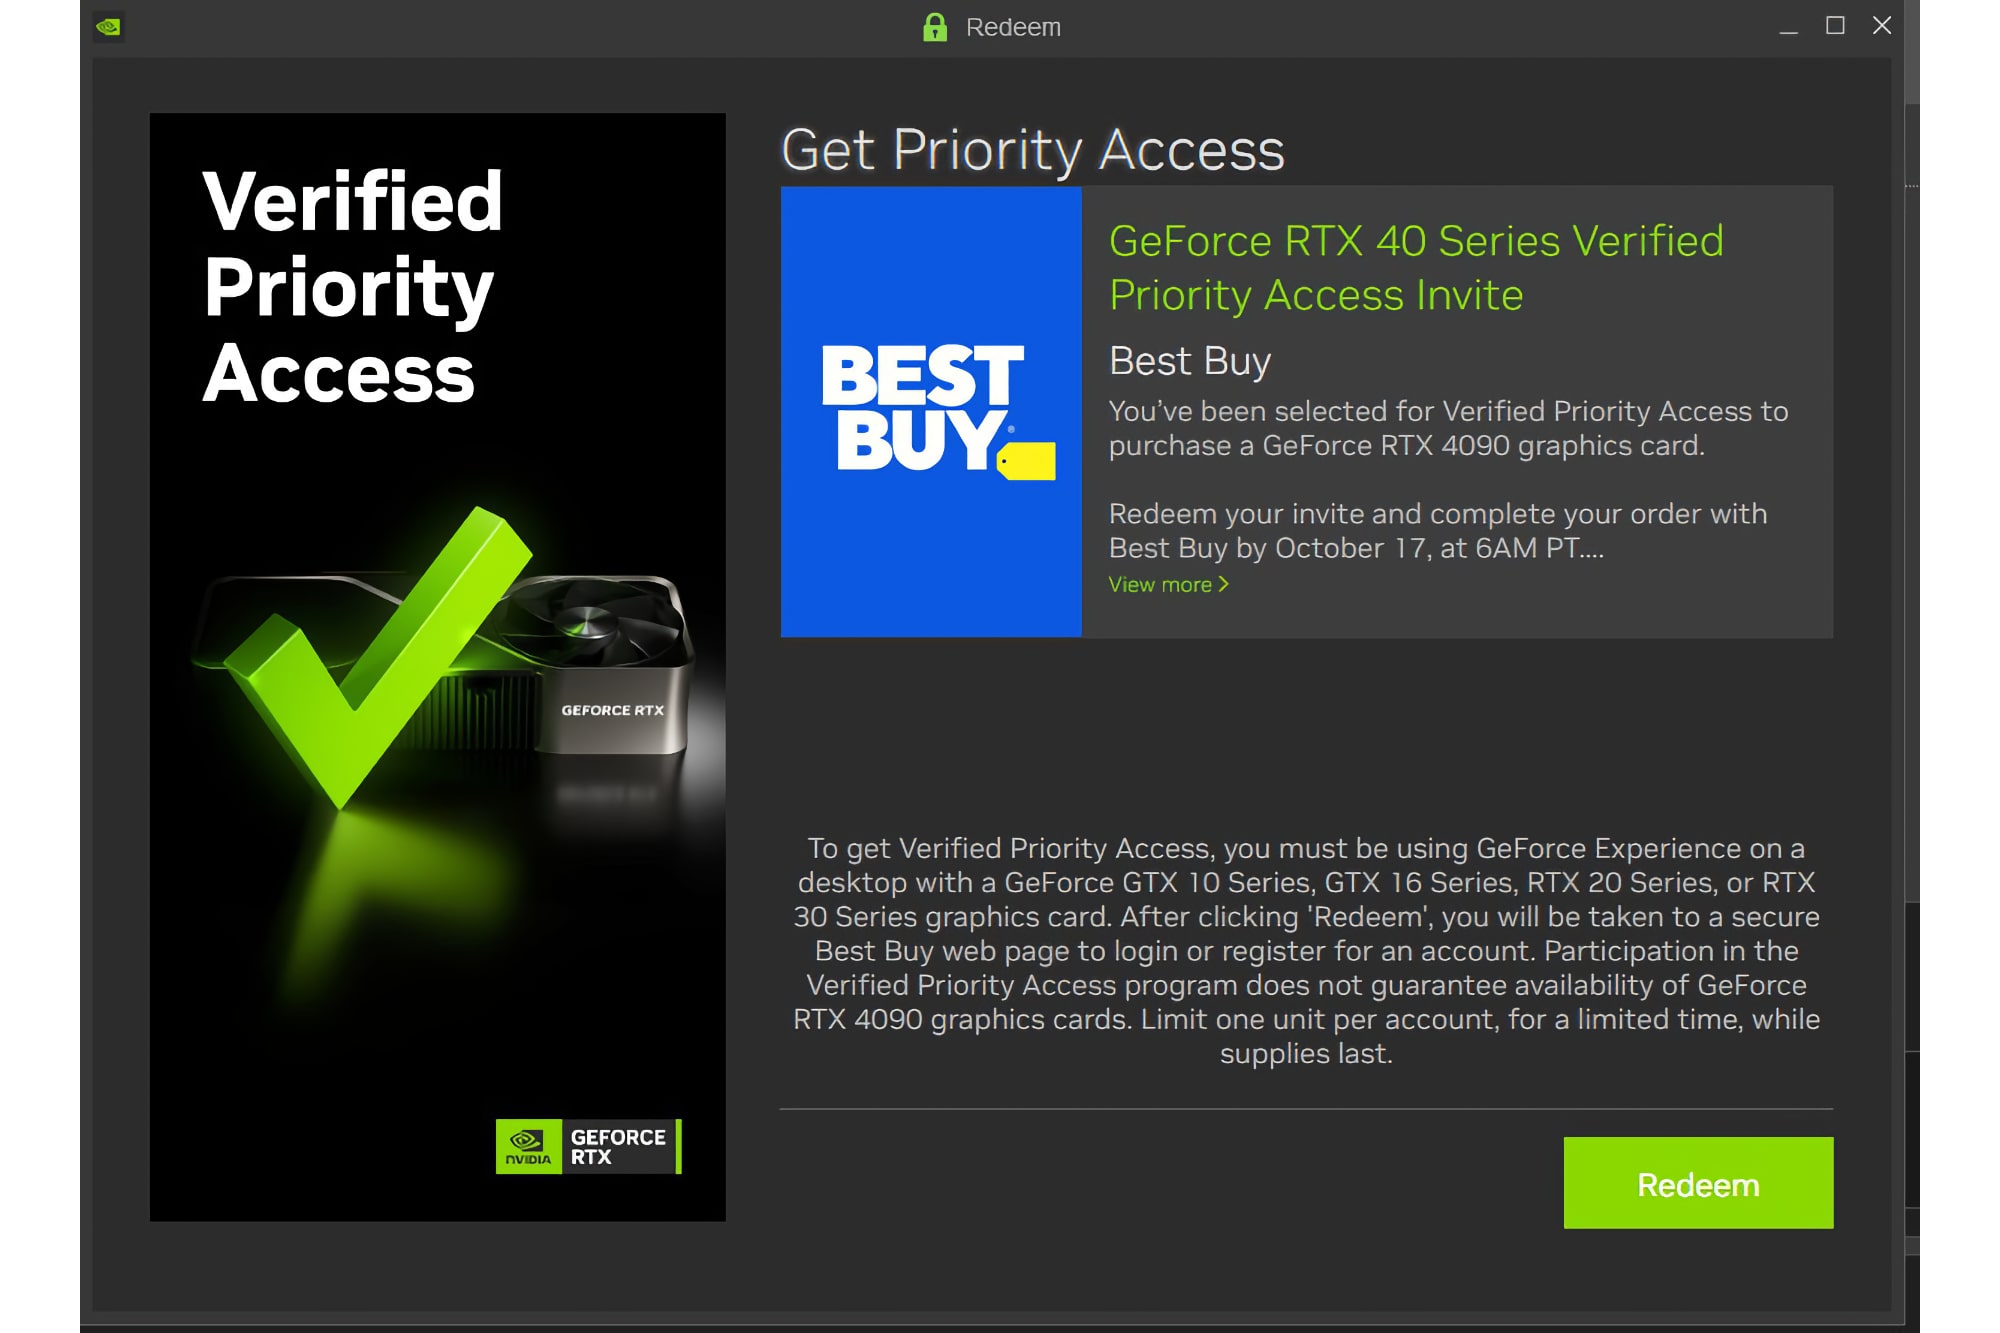 Here's what Nvidia Verified Priority Access looks like.